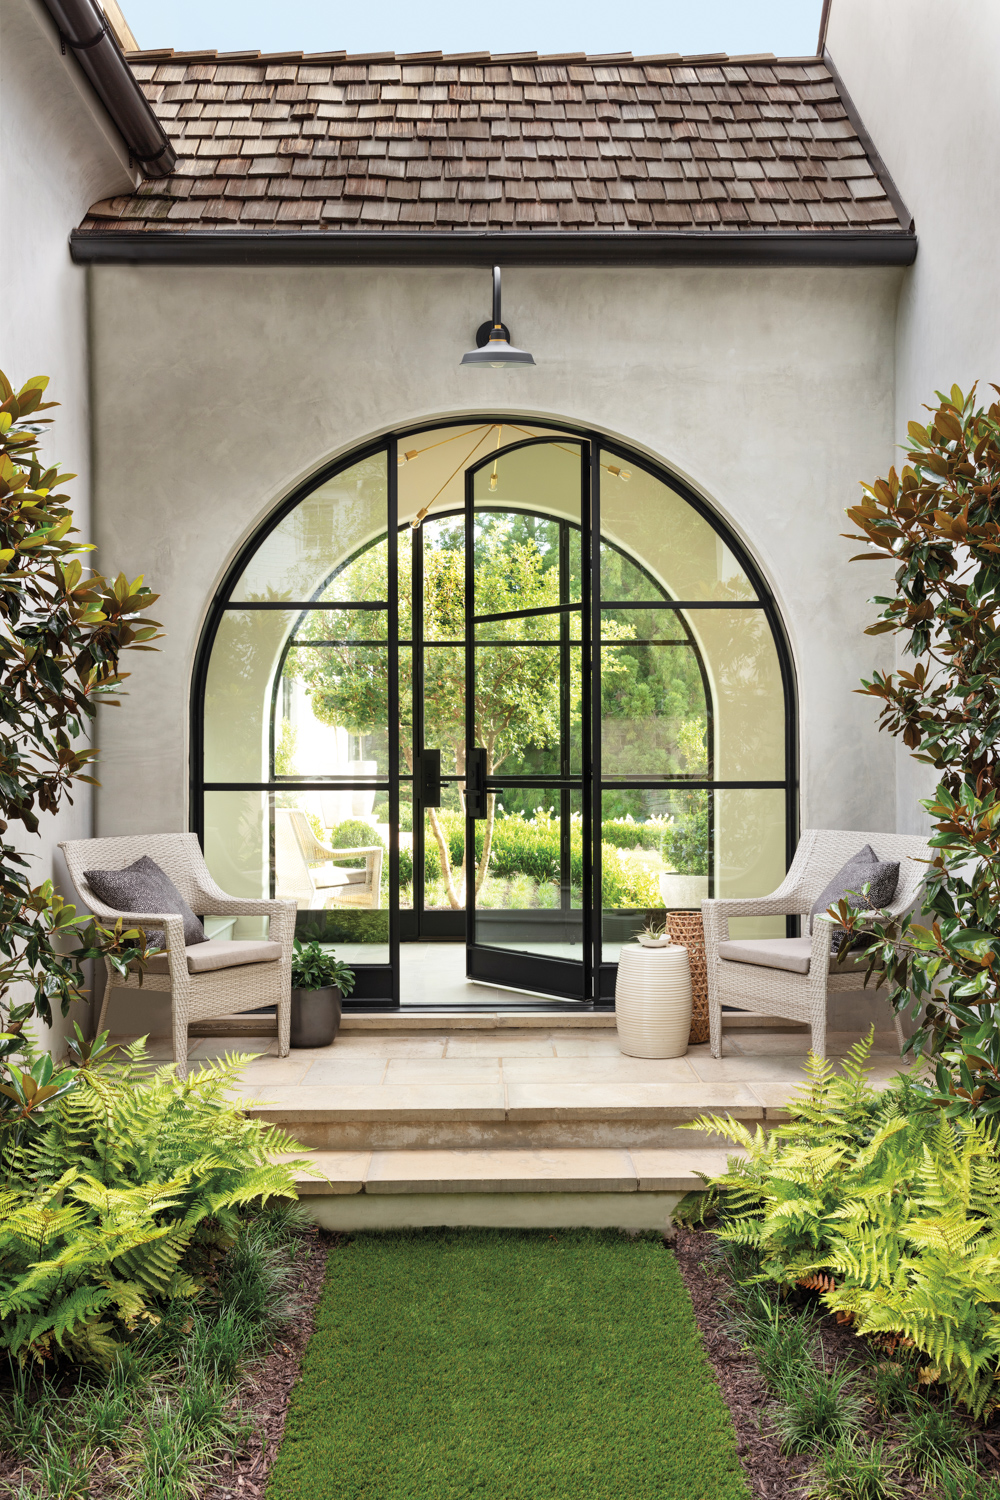 Stucco-coated entryway with arched French doors and lush gardens